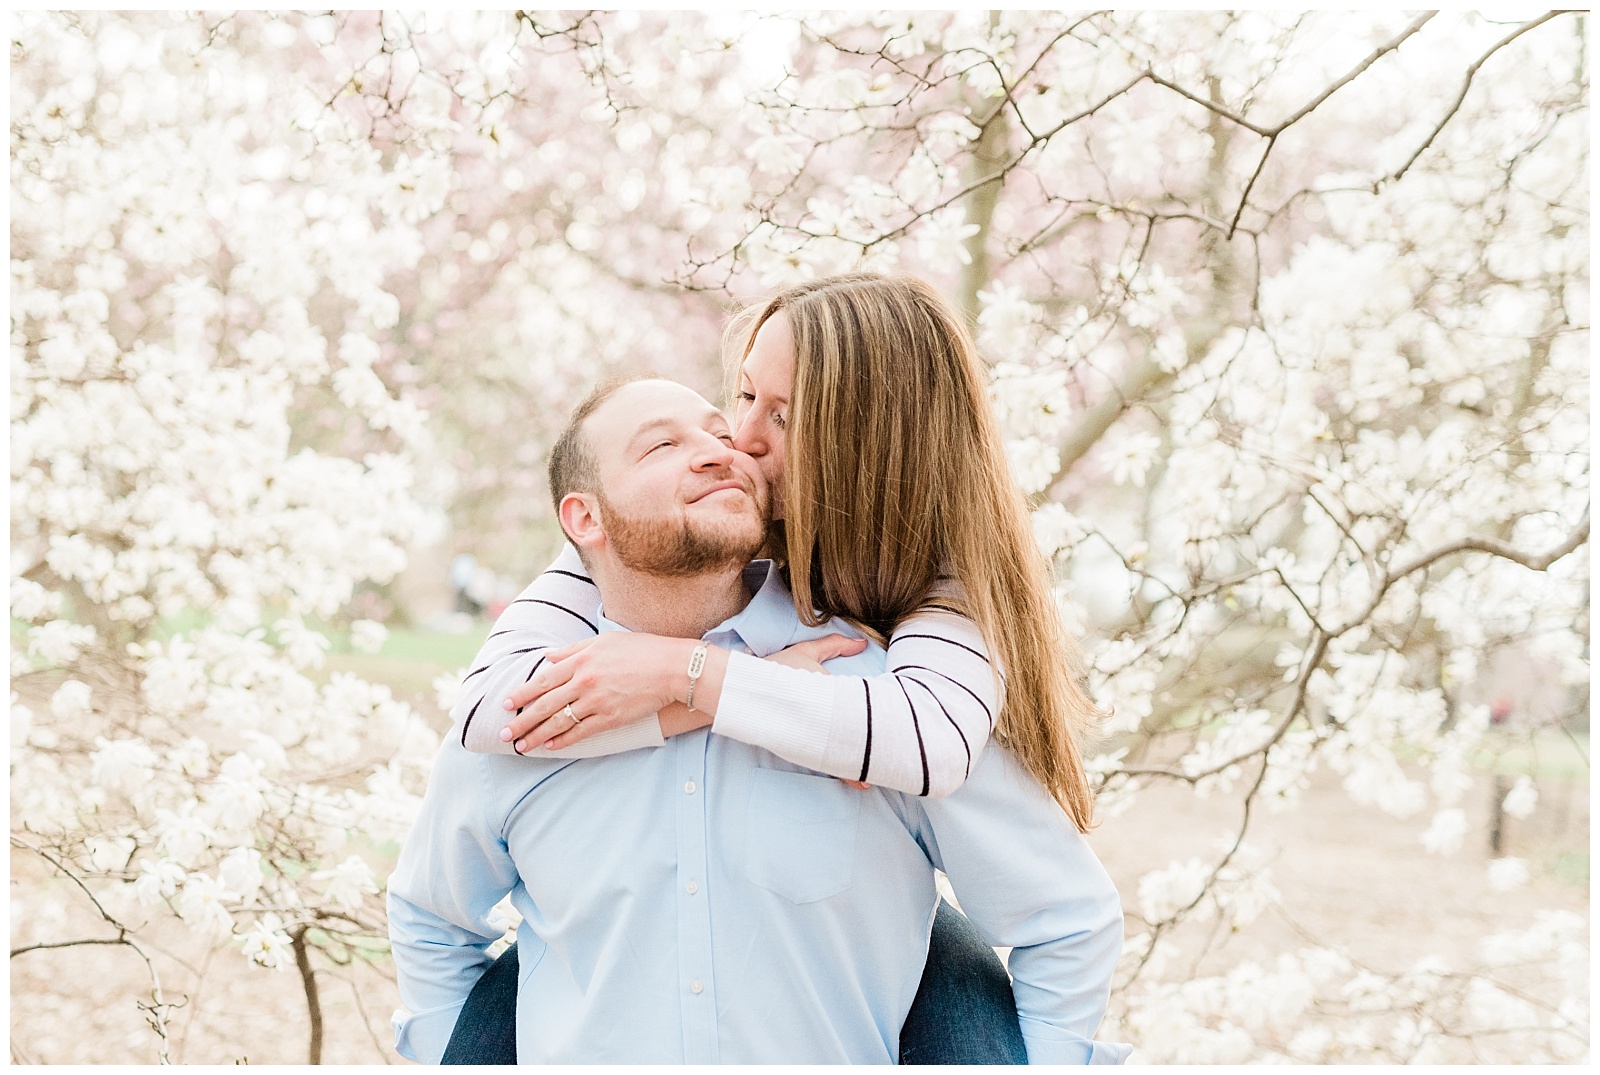 Central Park, NYC engagement session, springtime, wedding photographer, New York, in love, bright, light and airy